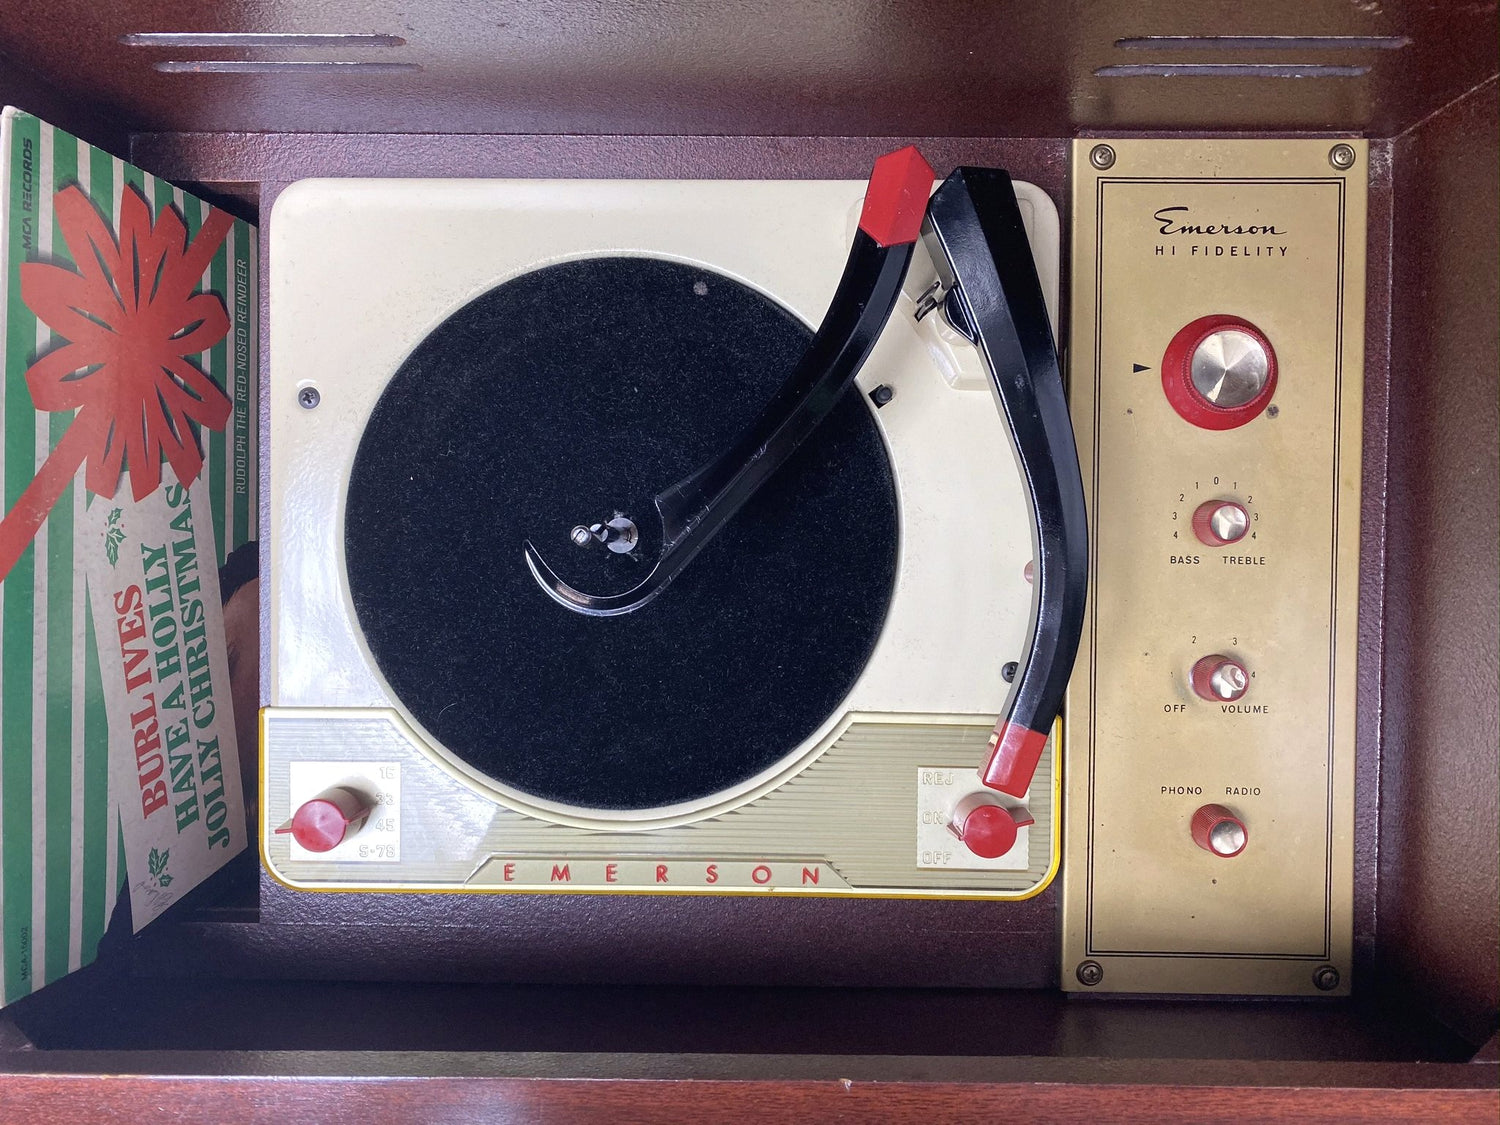 **SOLD OUT** EMERSON 50s 60s Hi Fidelity CONSOLE Record Player Changer AM Bluetooth The Vintedge Co.